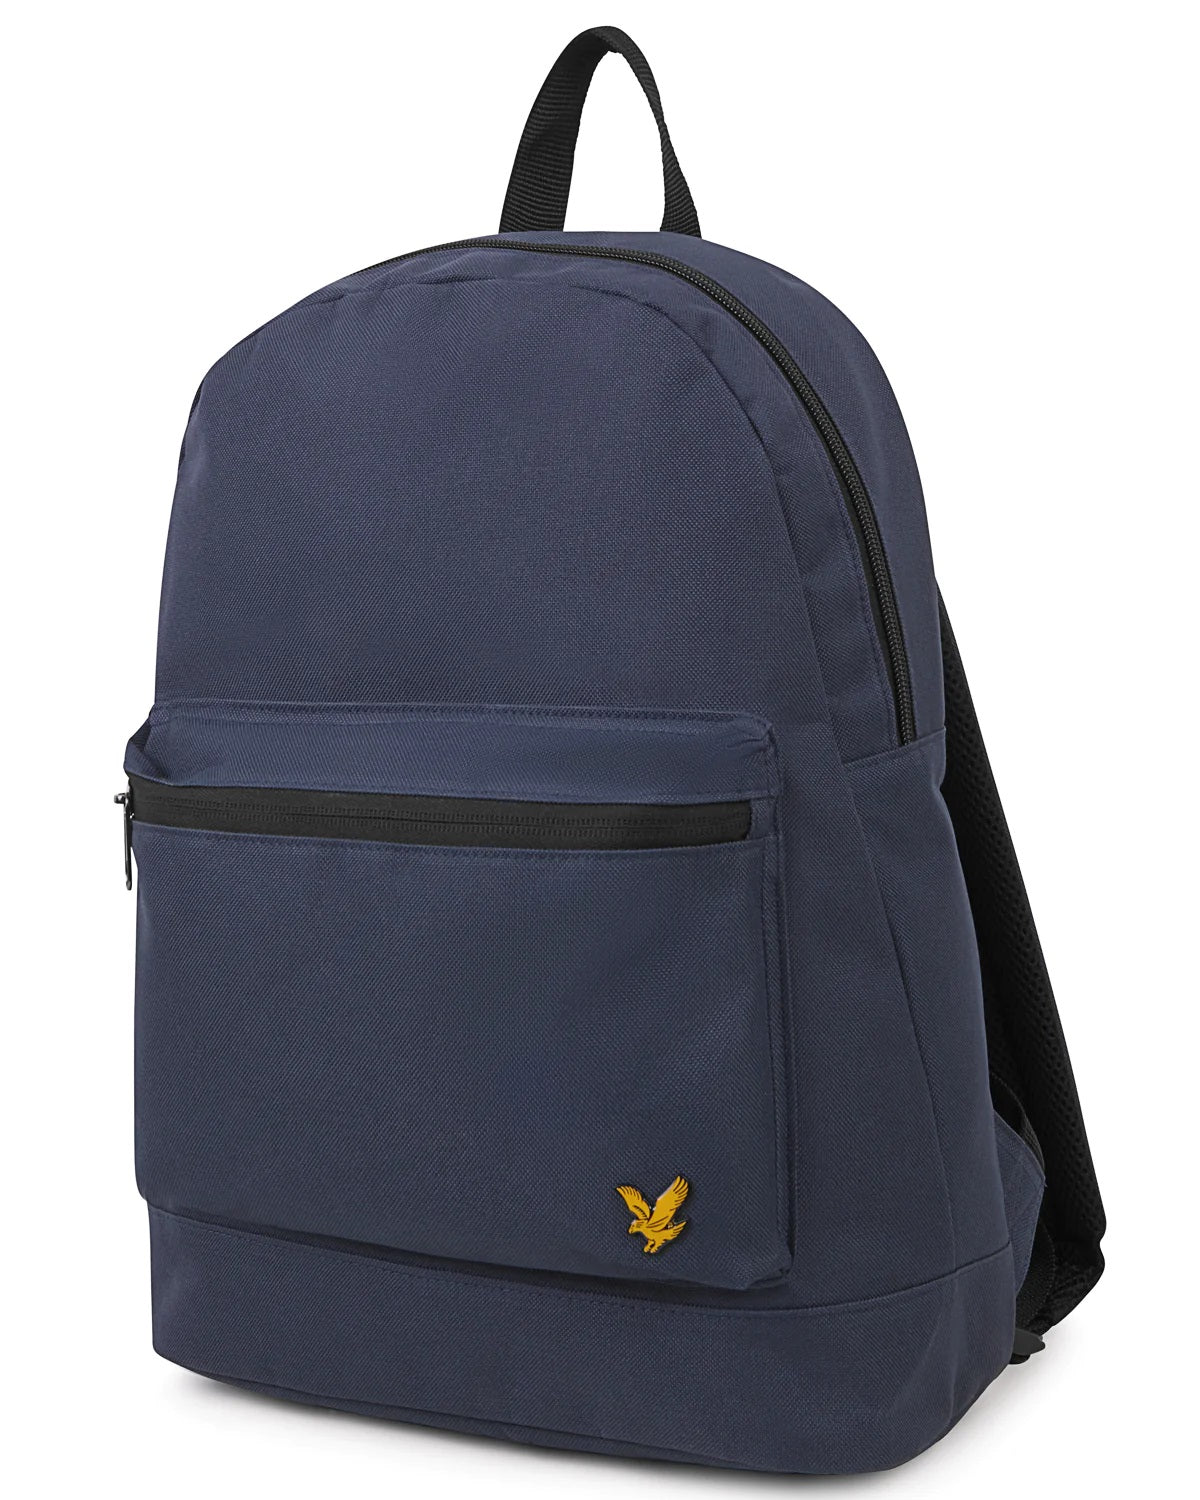 Lyle & Scott Classic Backpack/ Rucksack With Golden Eagle Logo, 01, Ba1200A, Navy